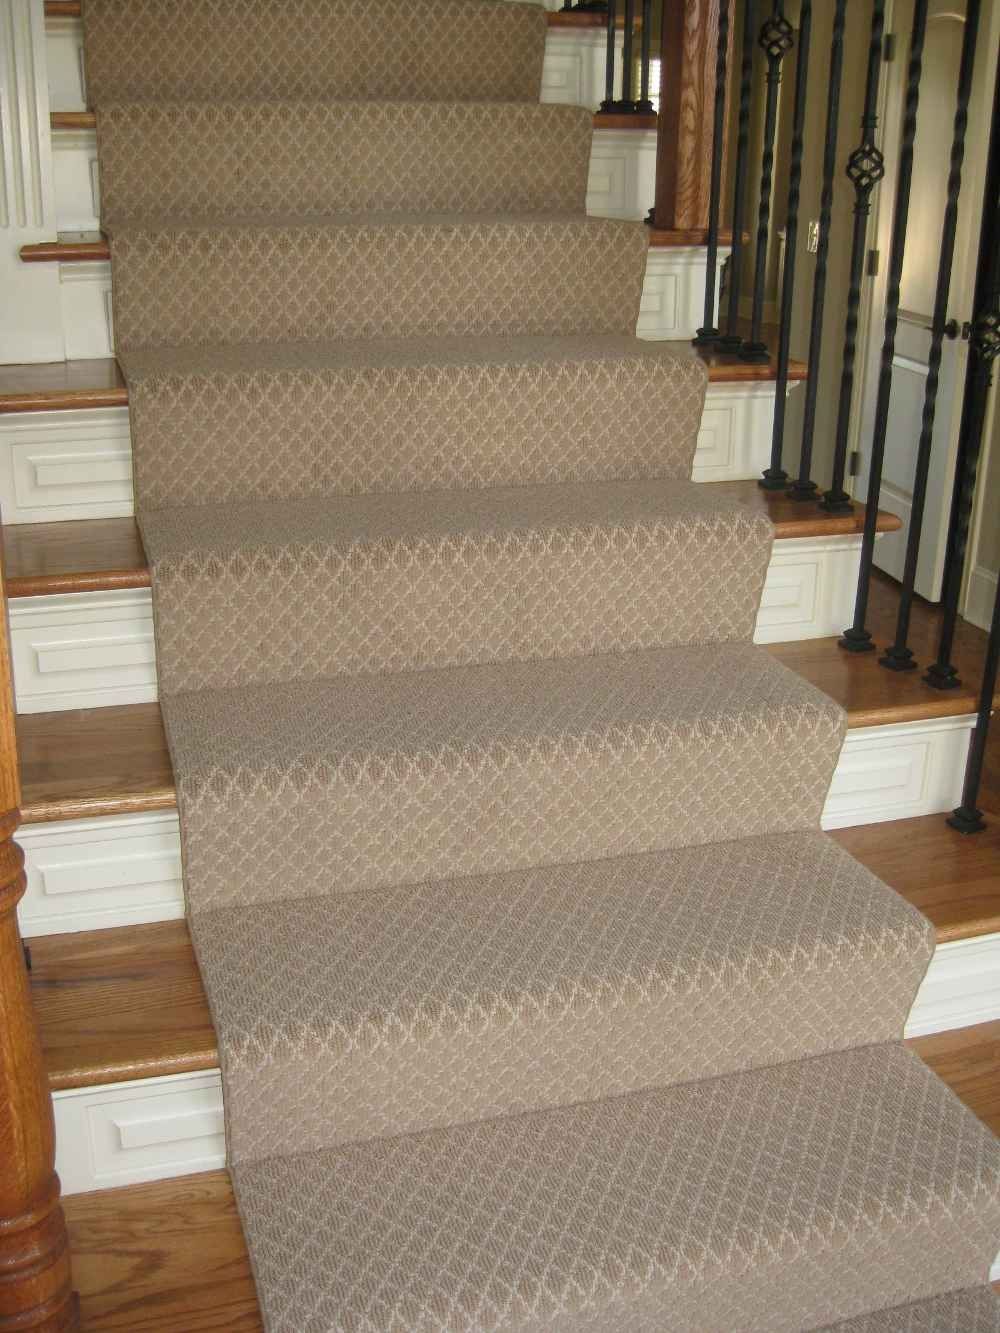 Keep Plastic Carpet Runners For Stairs Interior Home Design Regarding Carpets Runners For Stairs (View 9 of 20)